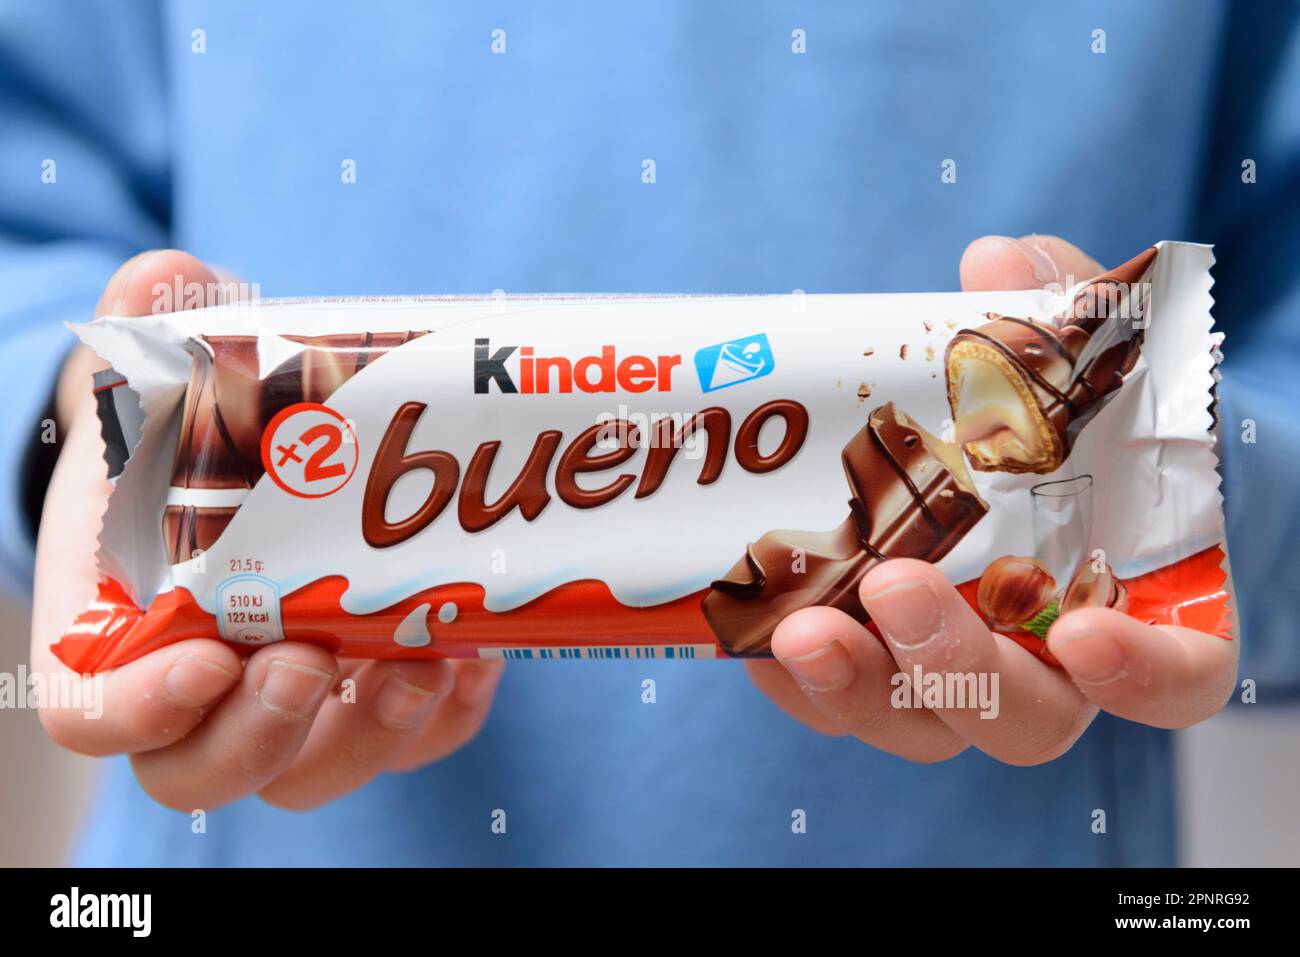 https://c8.alamy.com/comp/2PNRG92/arahal-seville-spain-march-18-2023-close-up-of-a-childs-hands-holding-a-candy-bar-from-the-brand-kinder-bueno-excessive-consumption-of-sugar-ca-2PNRG92.jpg